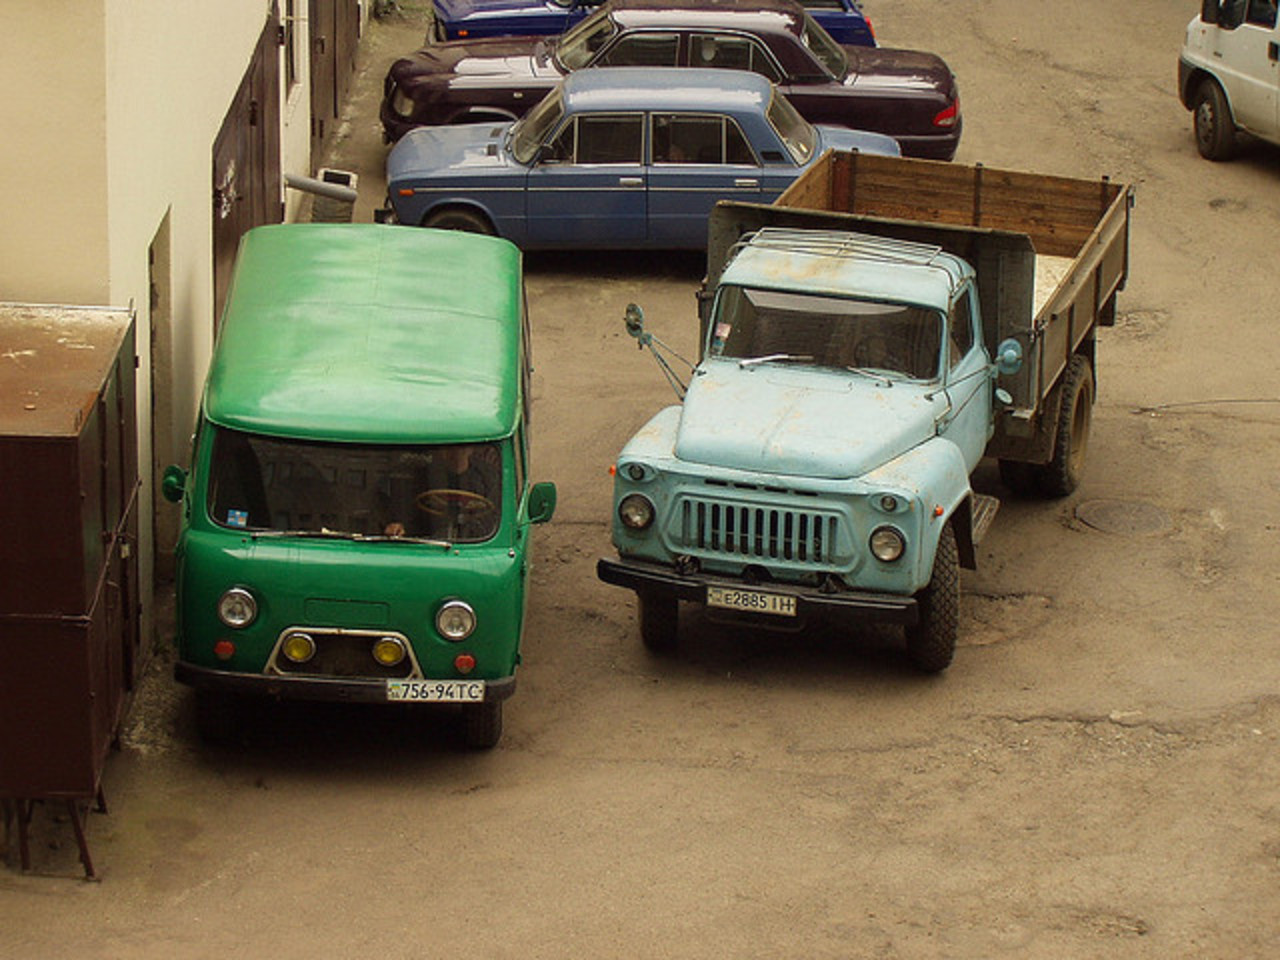 Cars made in CCCP | Flickr - Photo Sharing!